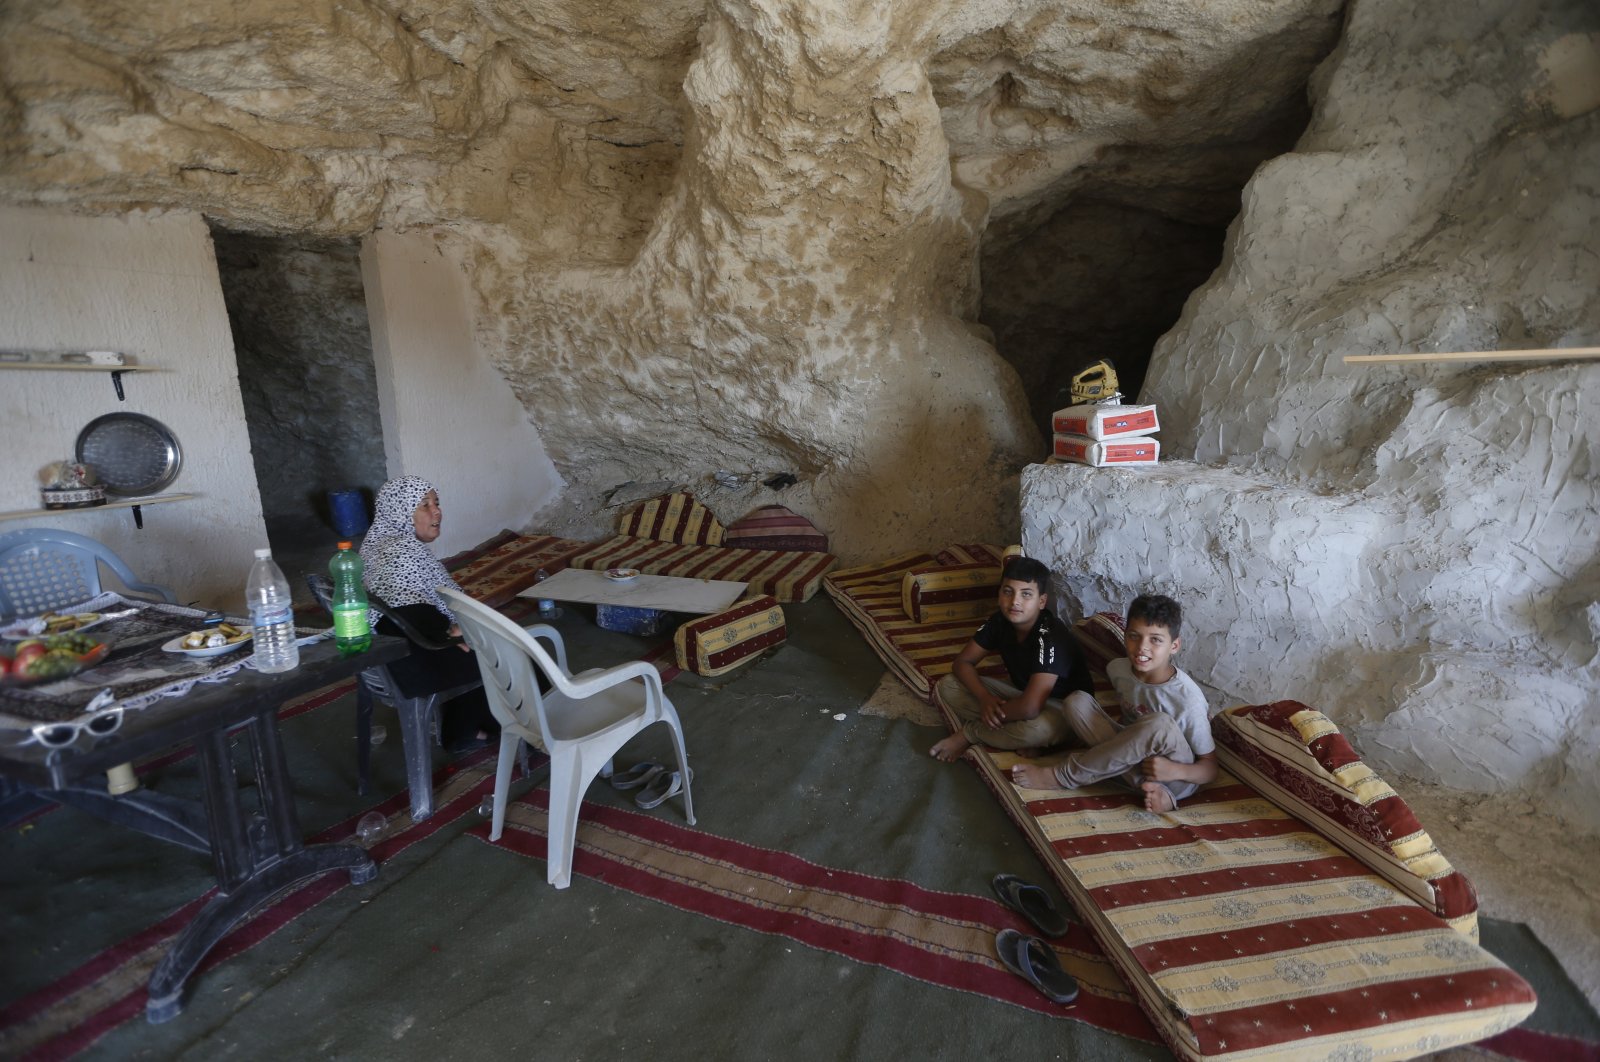 Members of a Palestinian family sit inside a cave they use as their home on the outskirts of the West Bank City of Jenin, Palestine, Aug. 1, 2020. (EPA Photo)